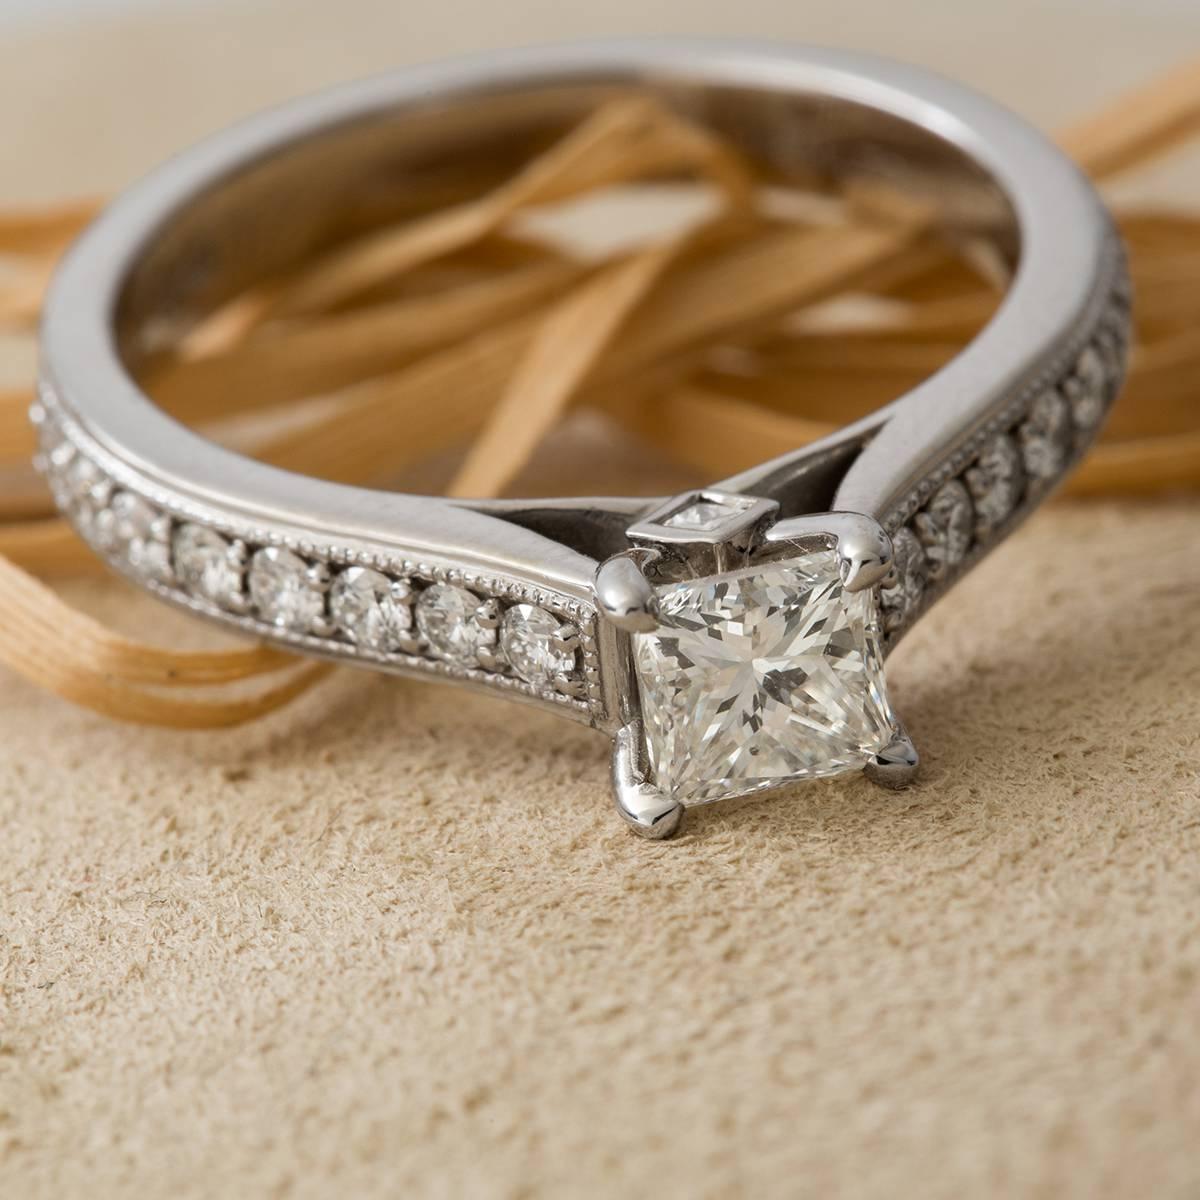 Signed Hamilton, 14 karat white gold and princess cut diamond engagement ring. Princess Cut weighs .64 cts and features a J color, VS1 clarity.  The band features 16 Round diamonds weighing a total of 37 cts. GIA certified. Size 6. 3/4 can be sized